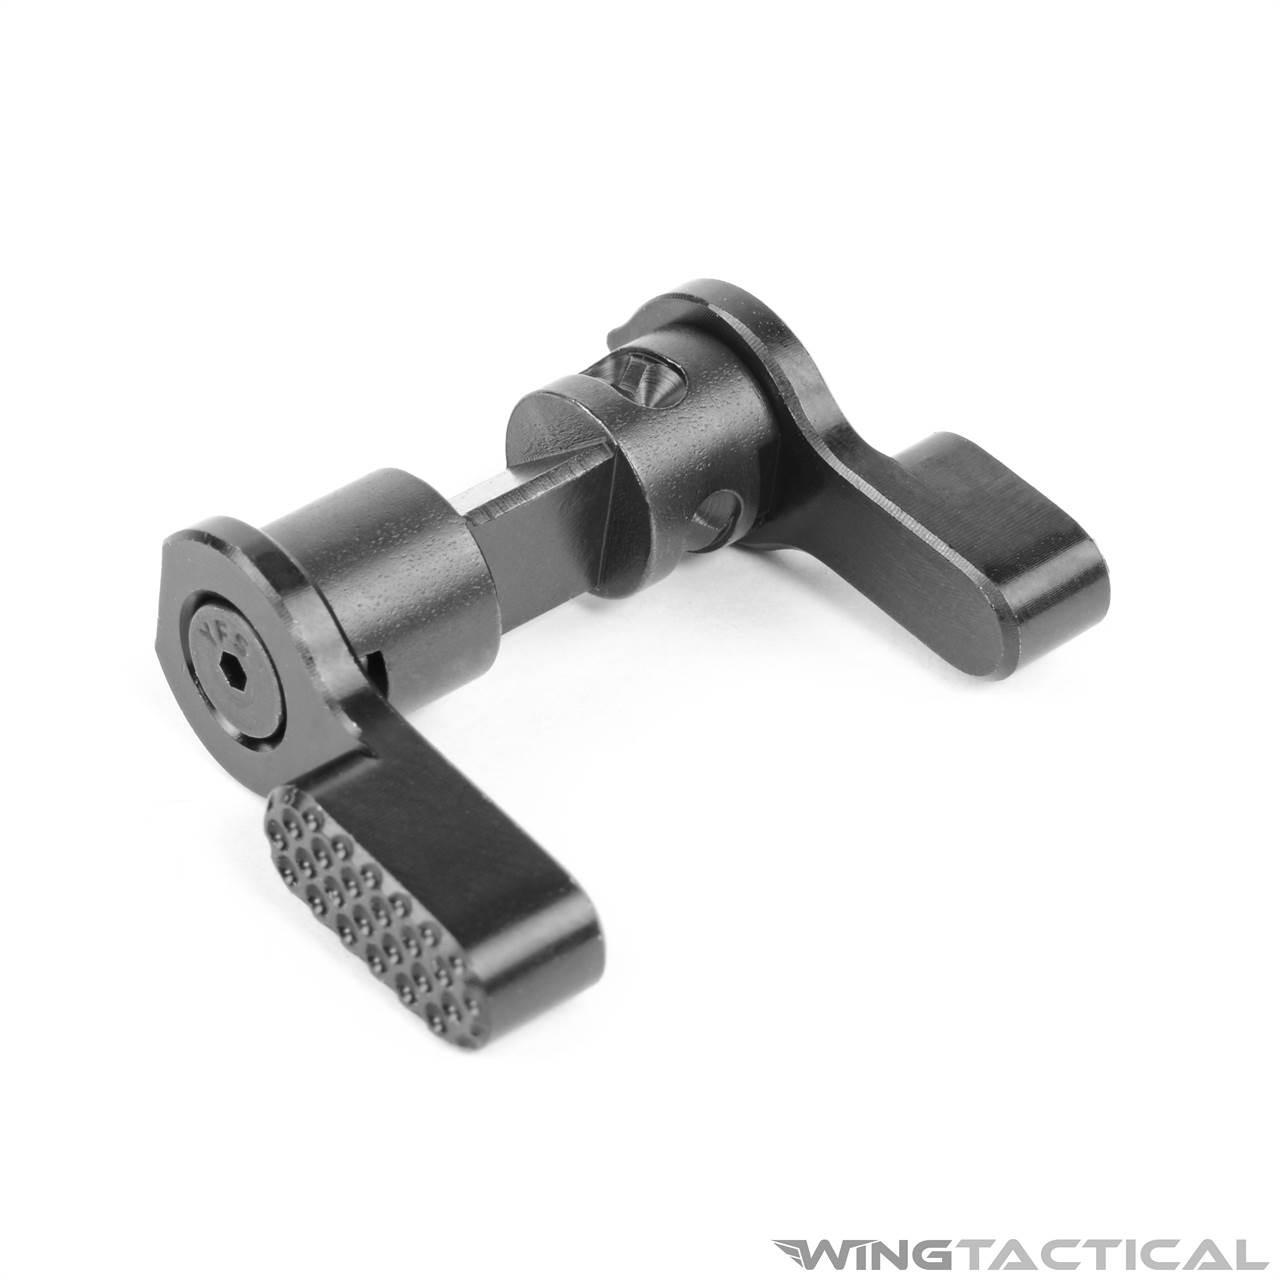 ERGO AR 45/90 Ambidextrous Safety Selector | Wing Tactical